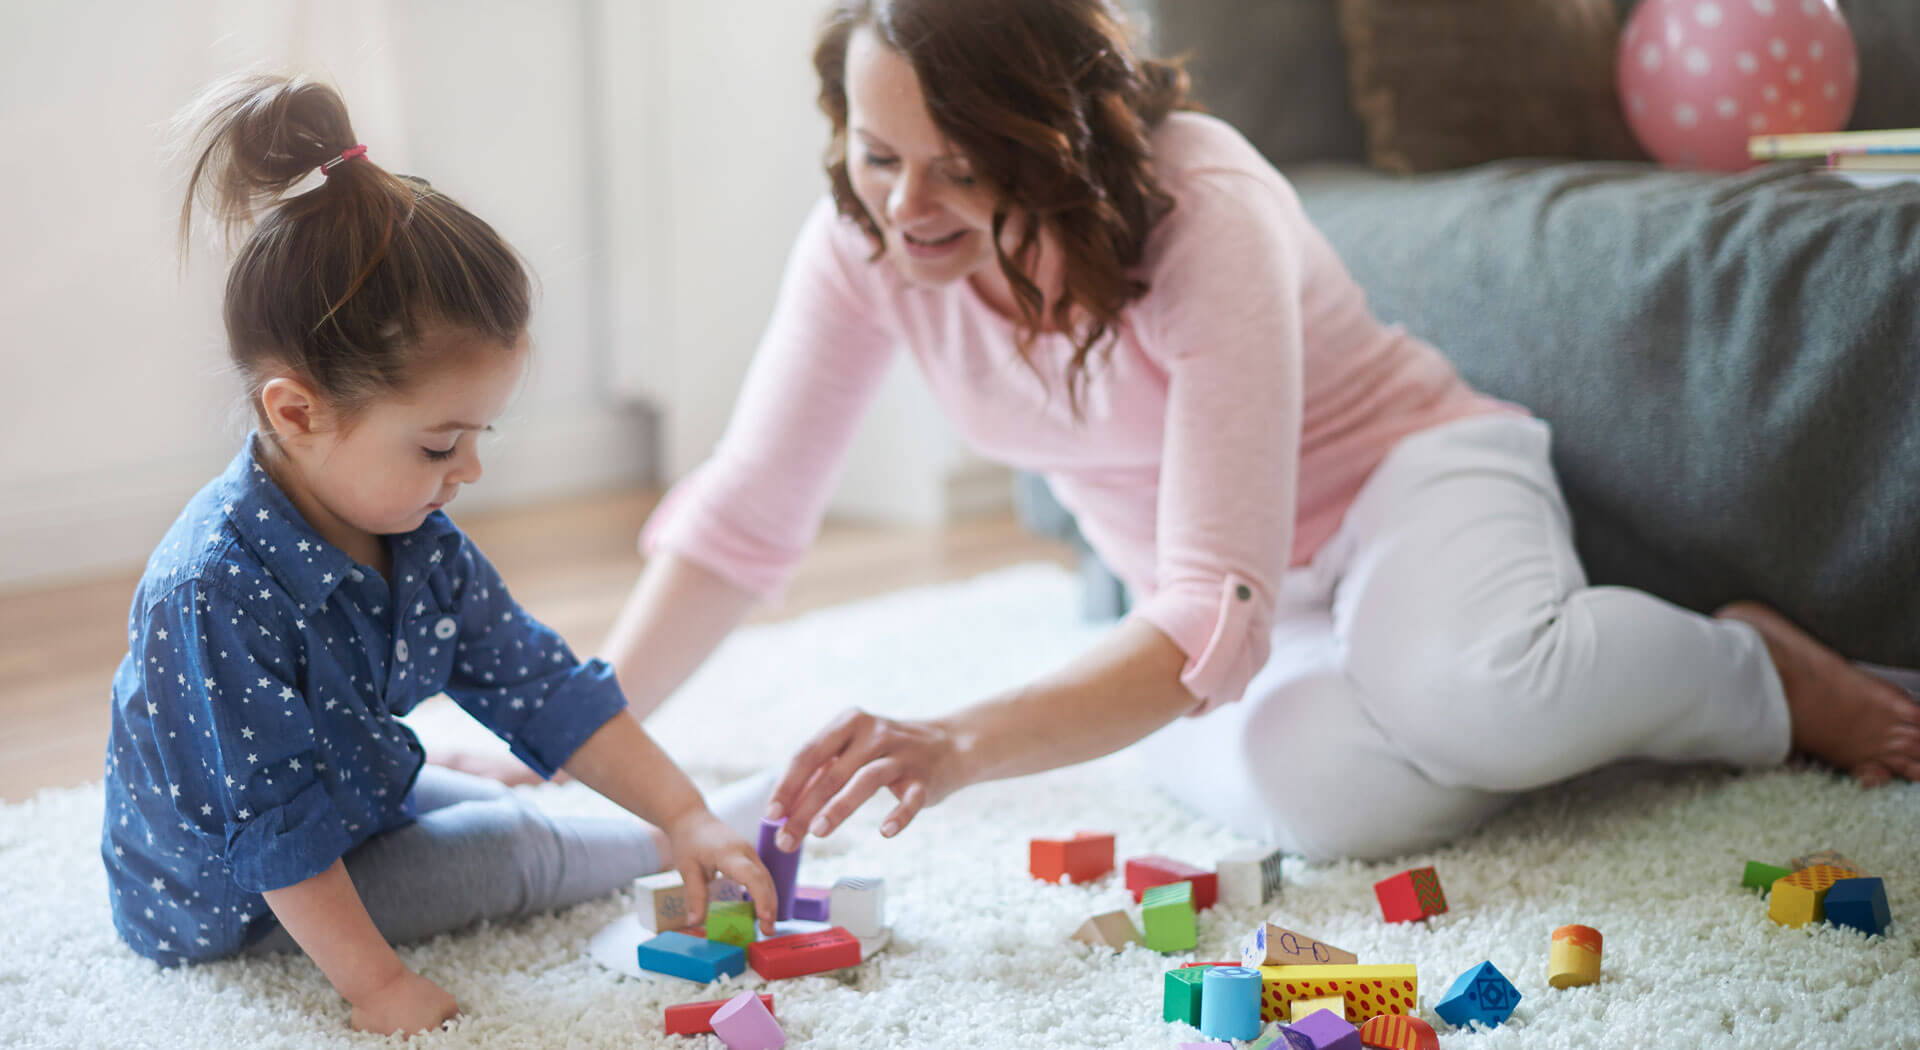 We Provide Best Home Child Care Services